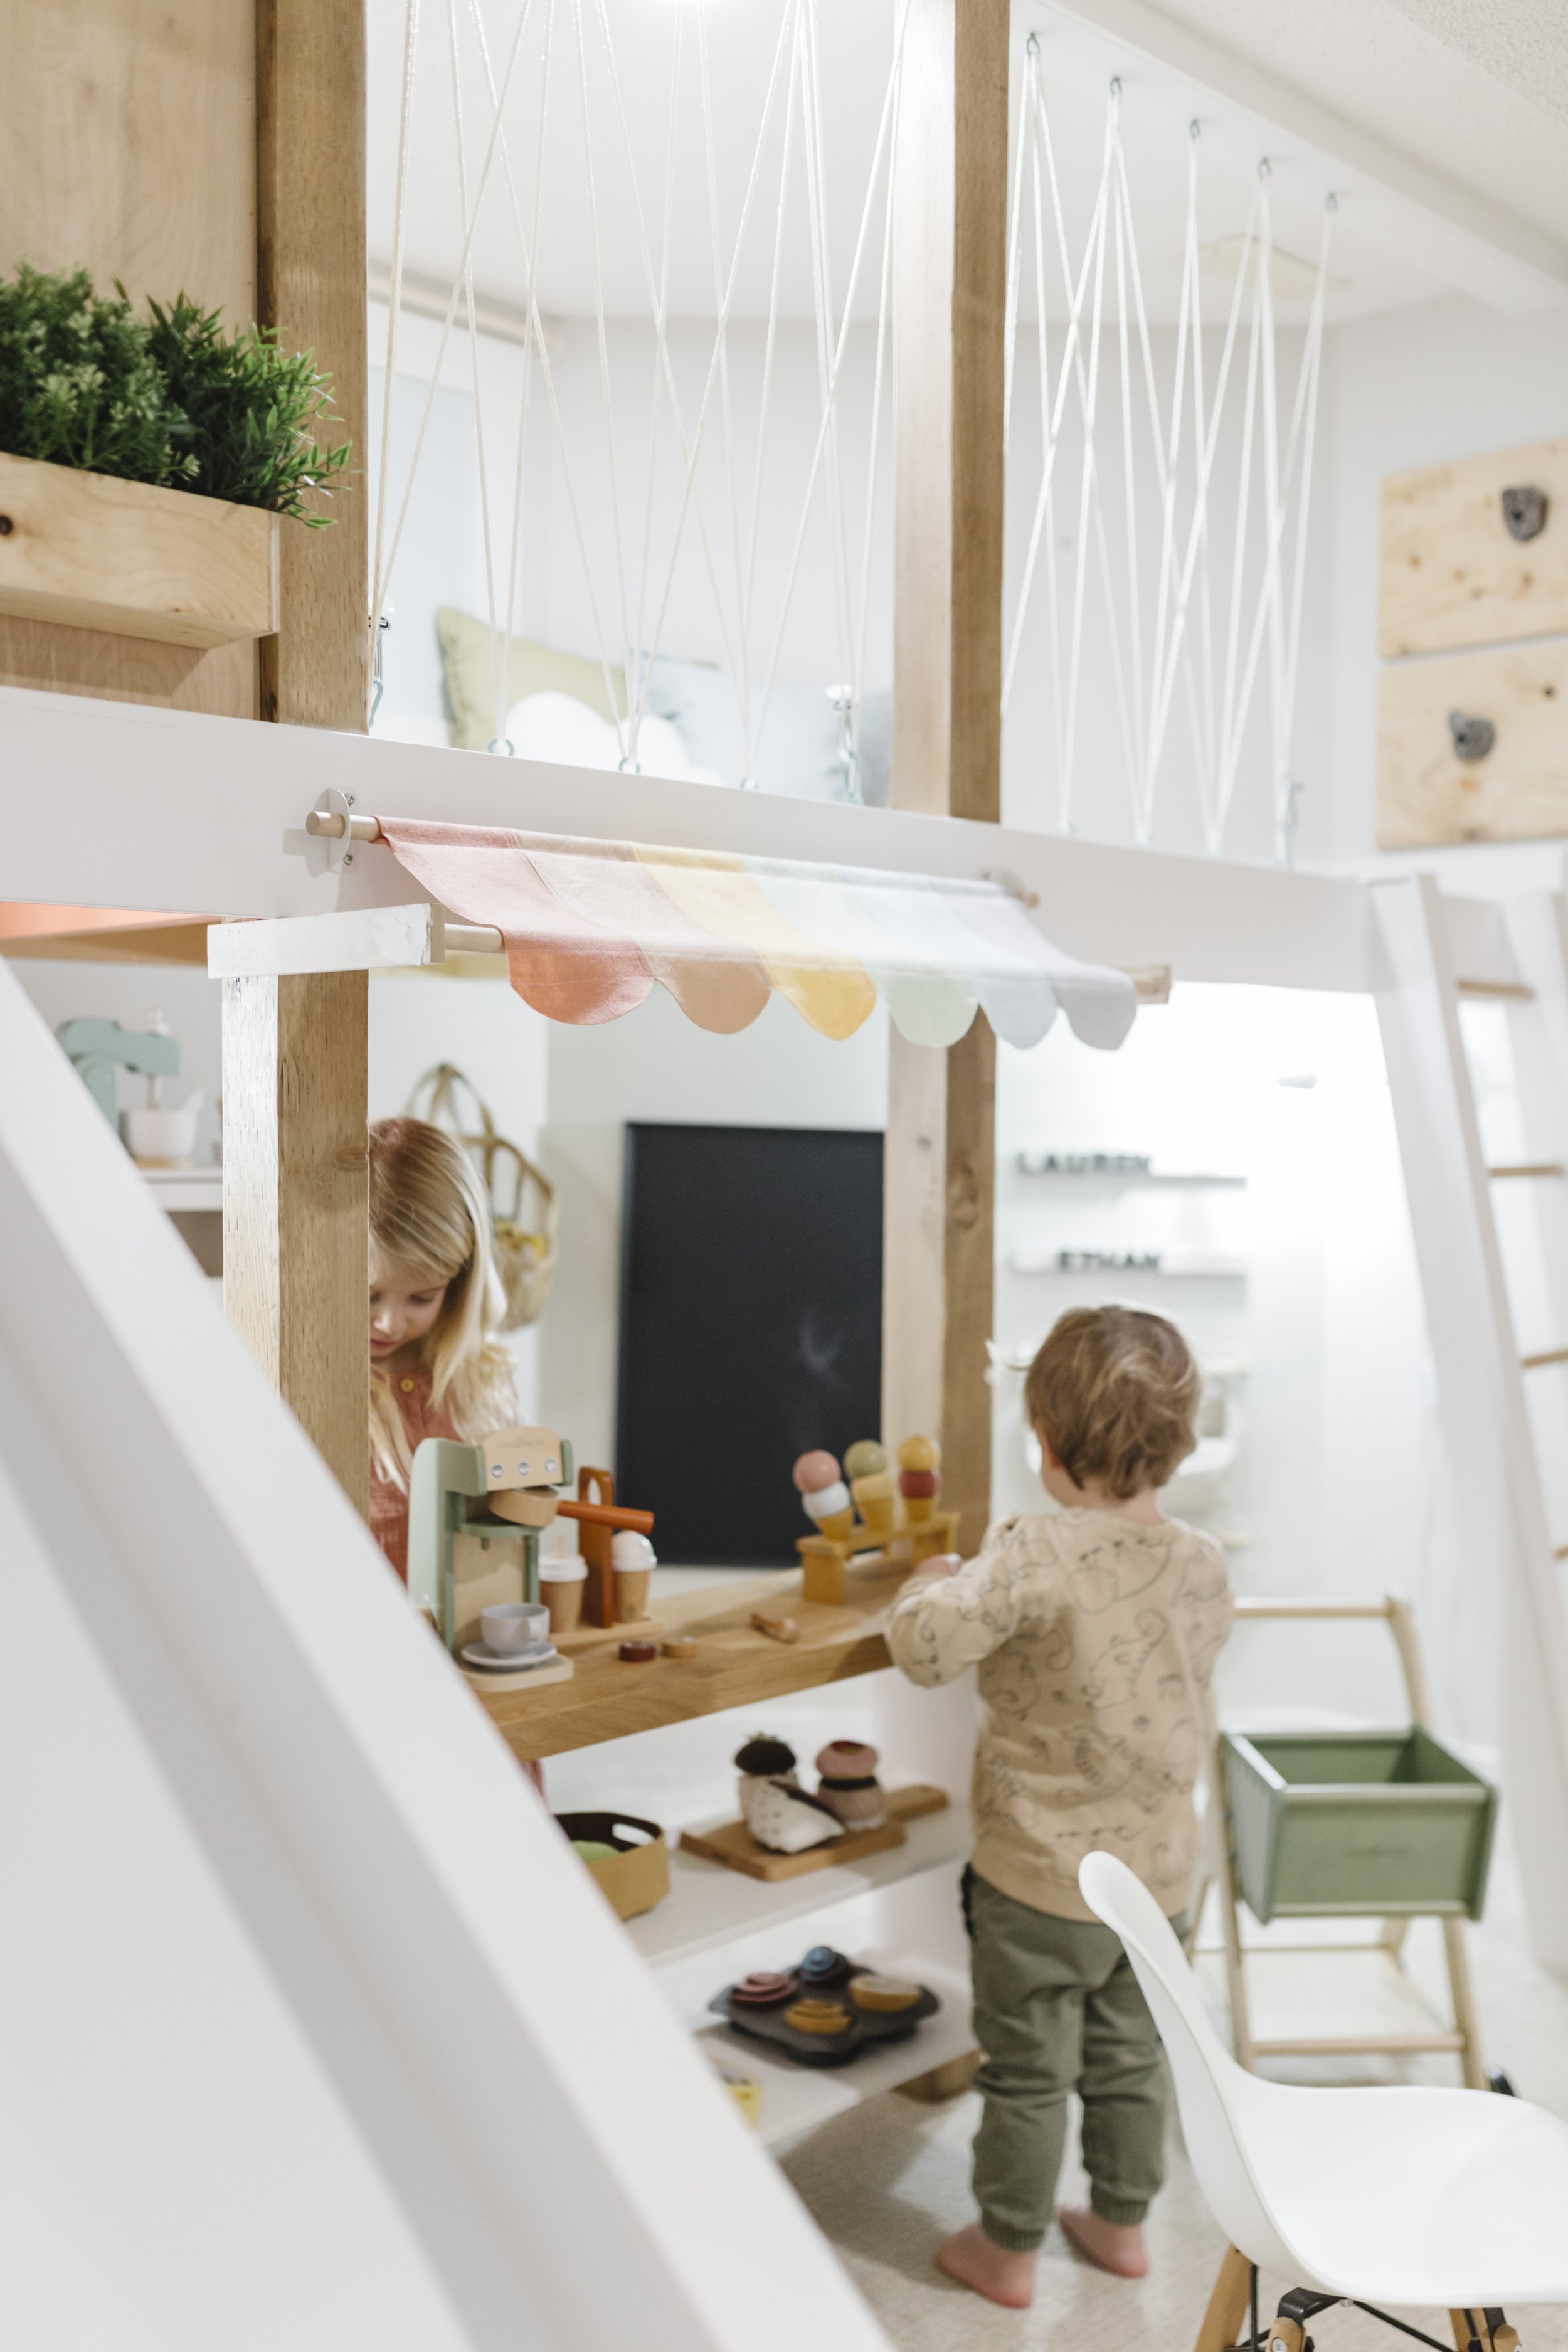 10 Ideas for Playing With Bubbles - The Inspired Treehouse